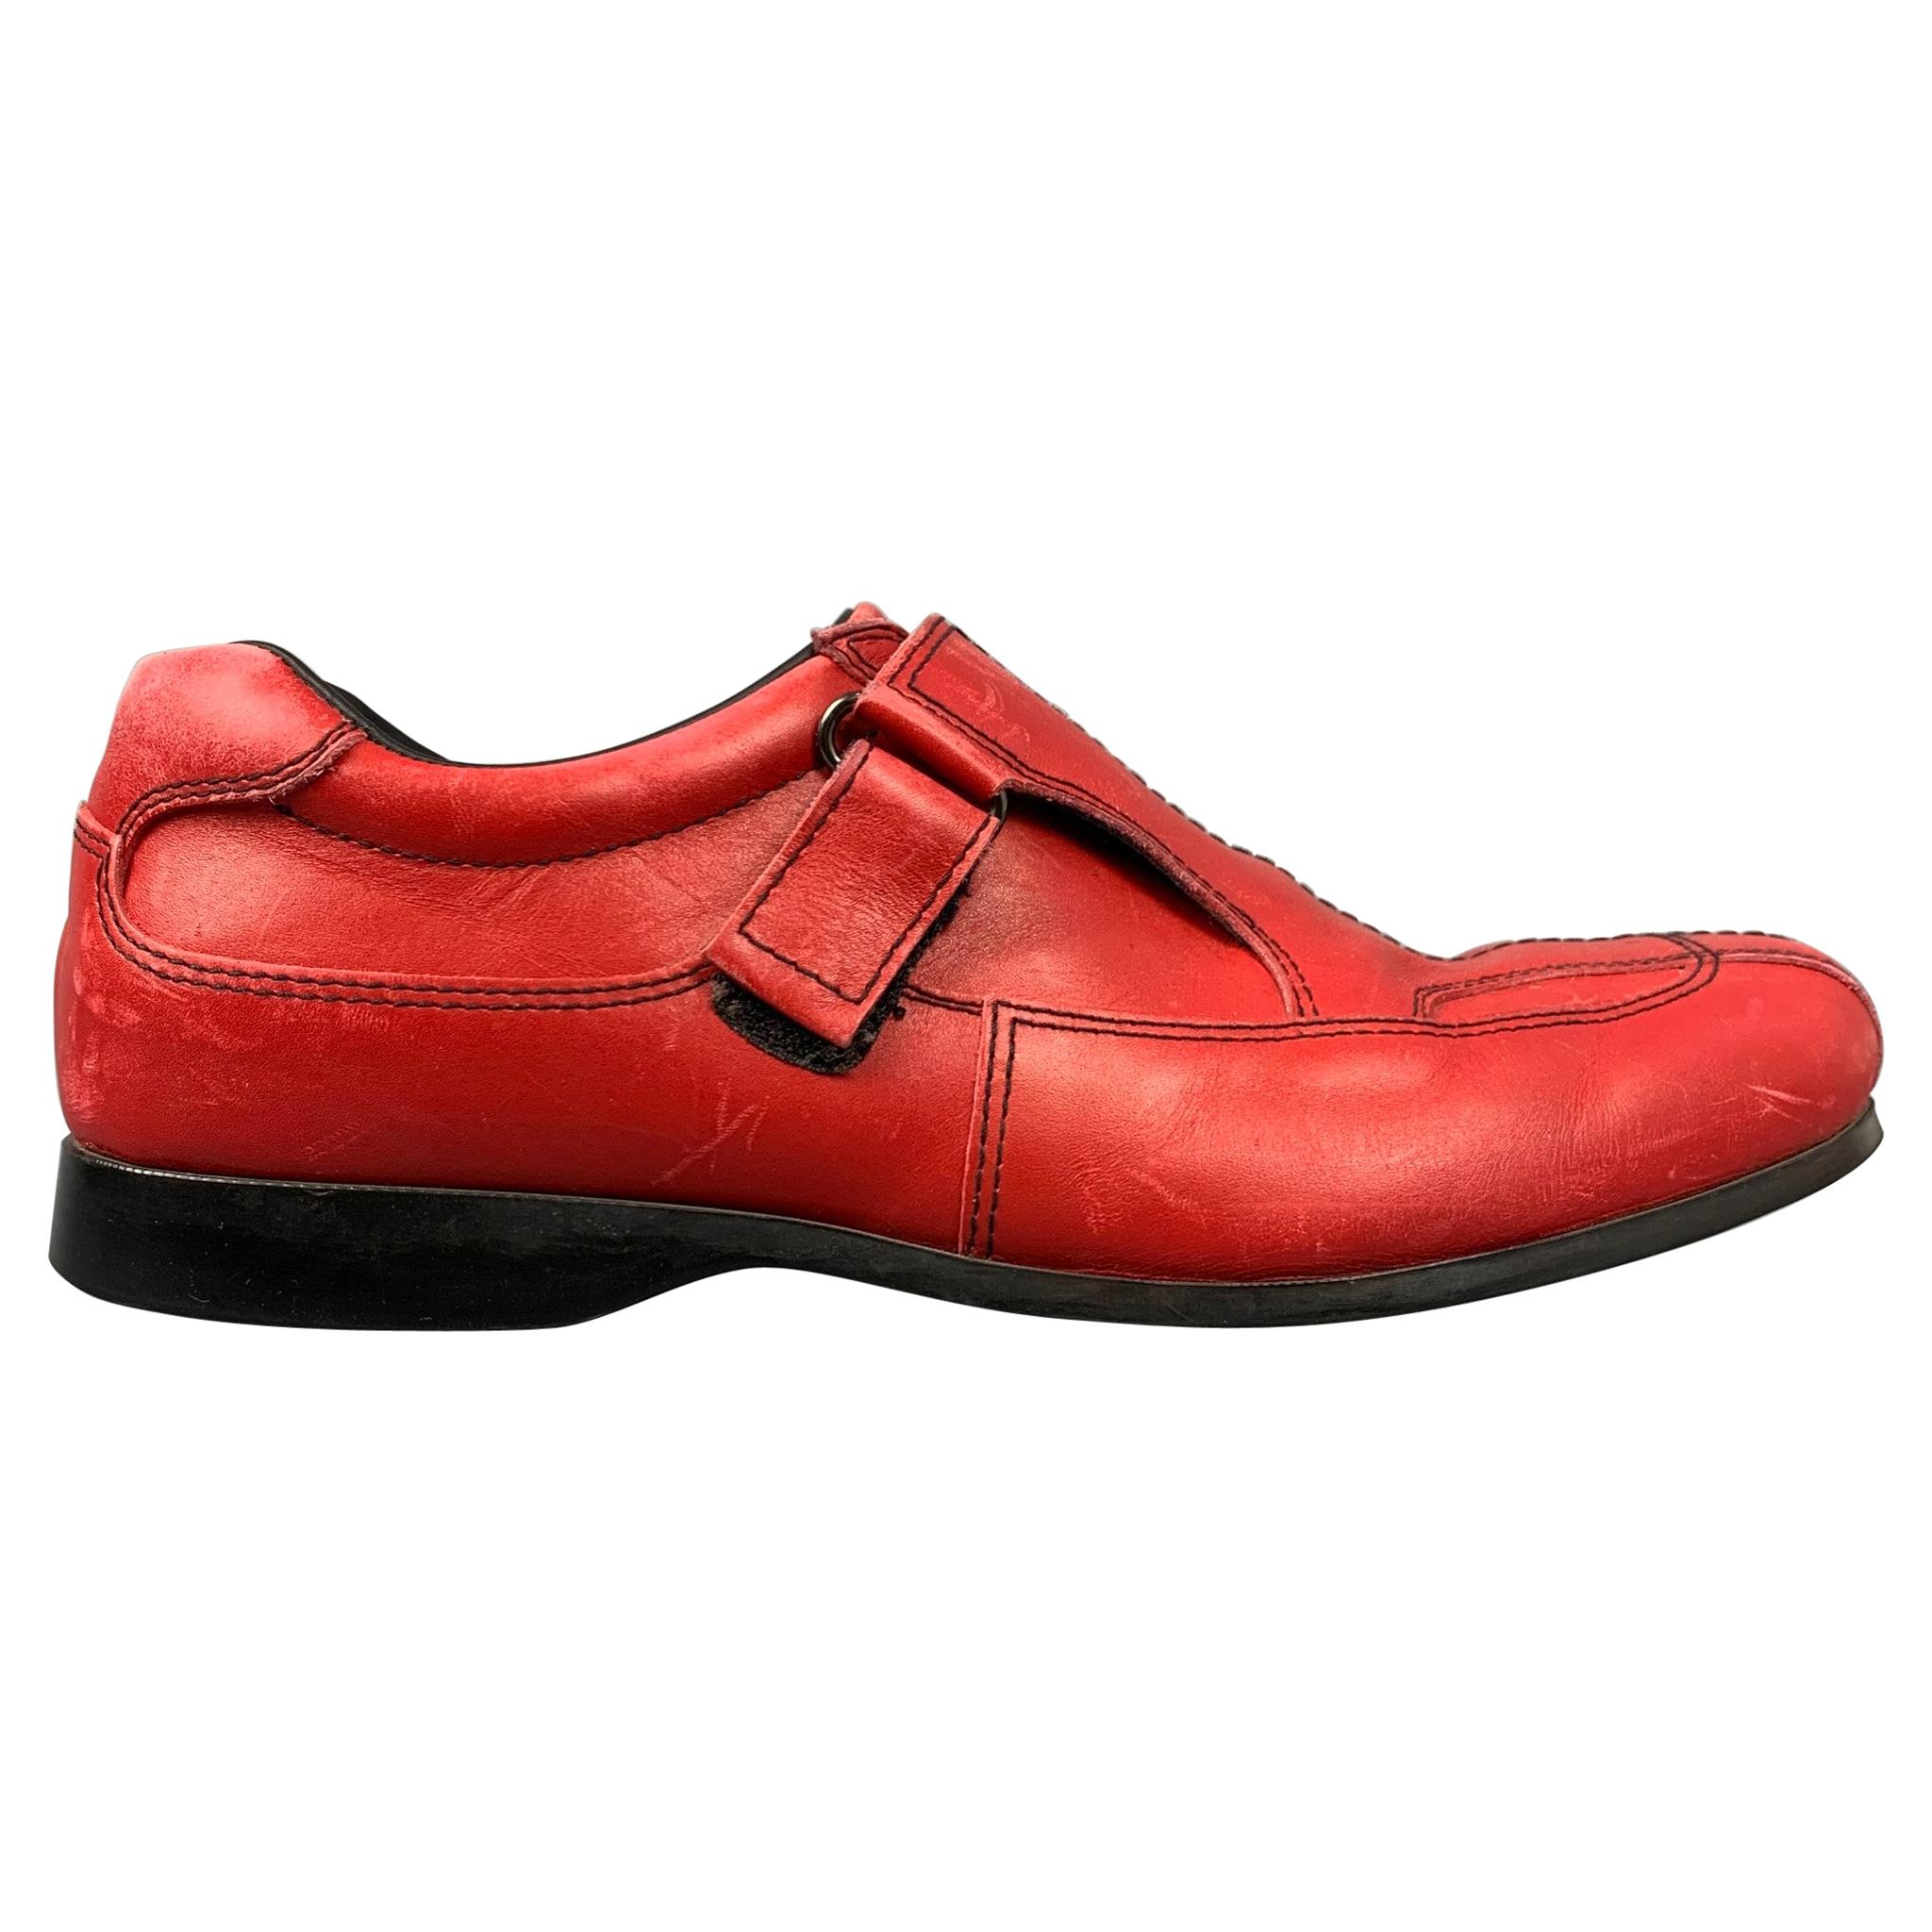 PRADA Sport Size 9.5 Red Leather Hook & Loop Loafers